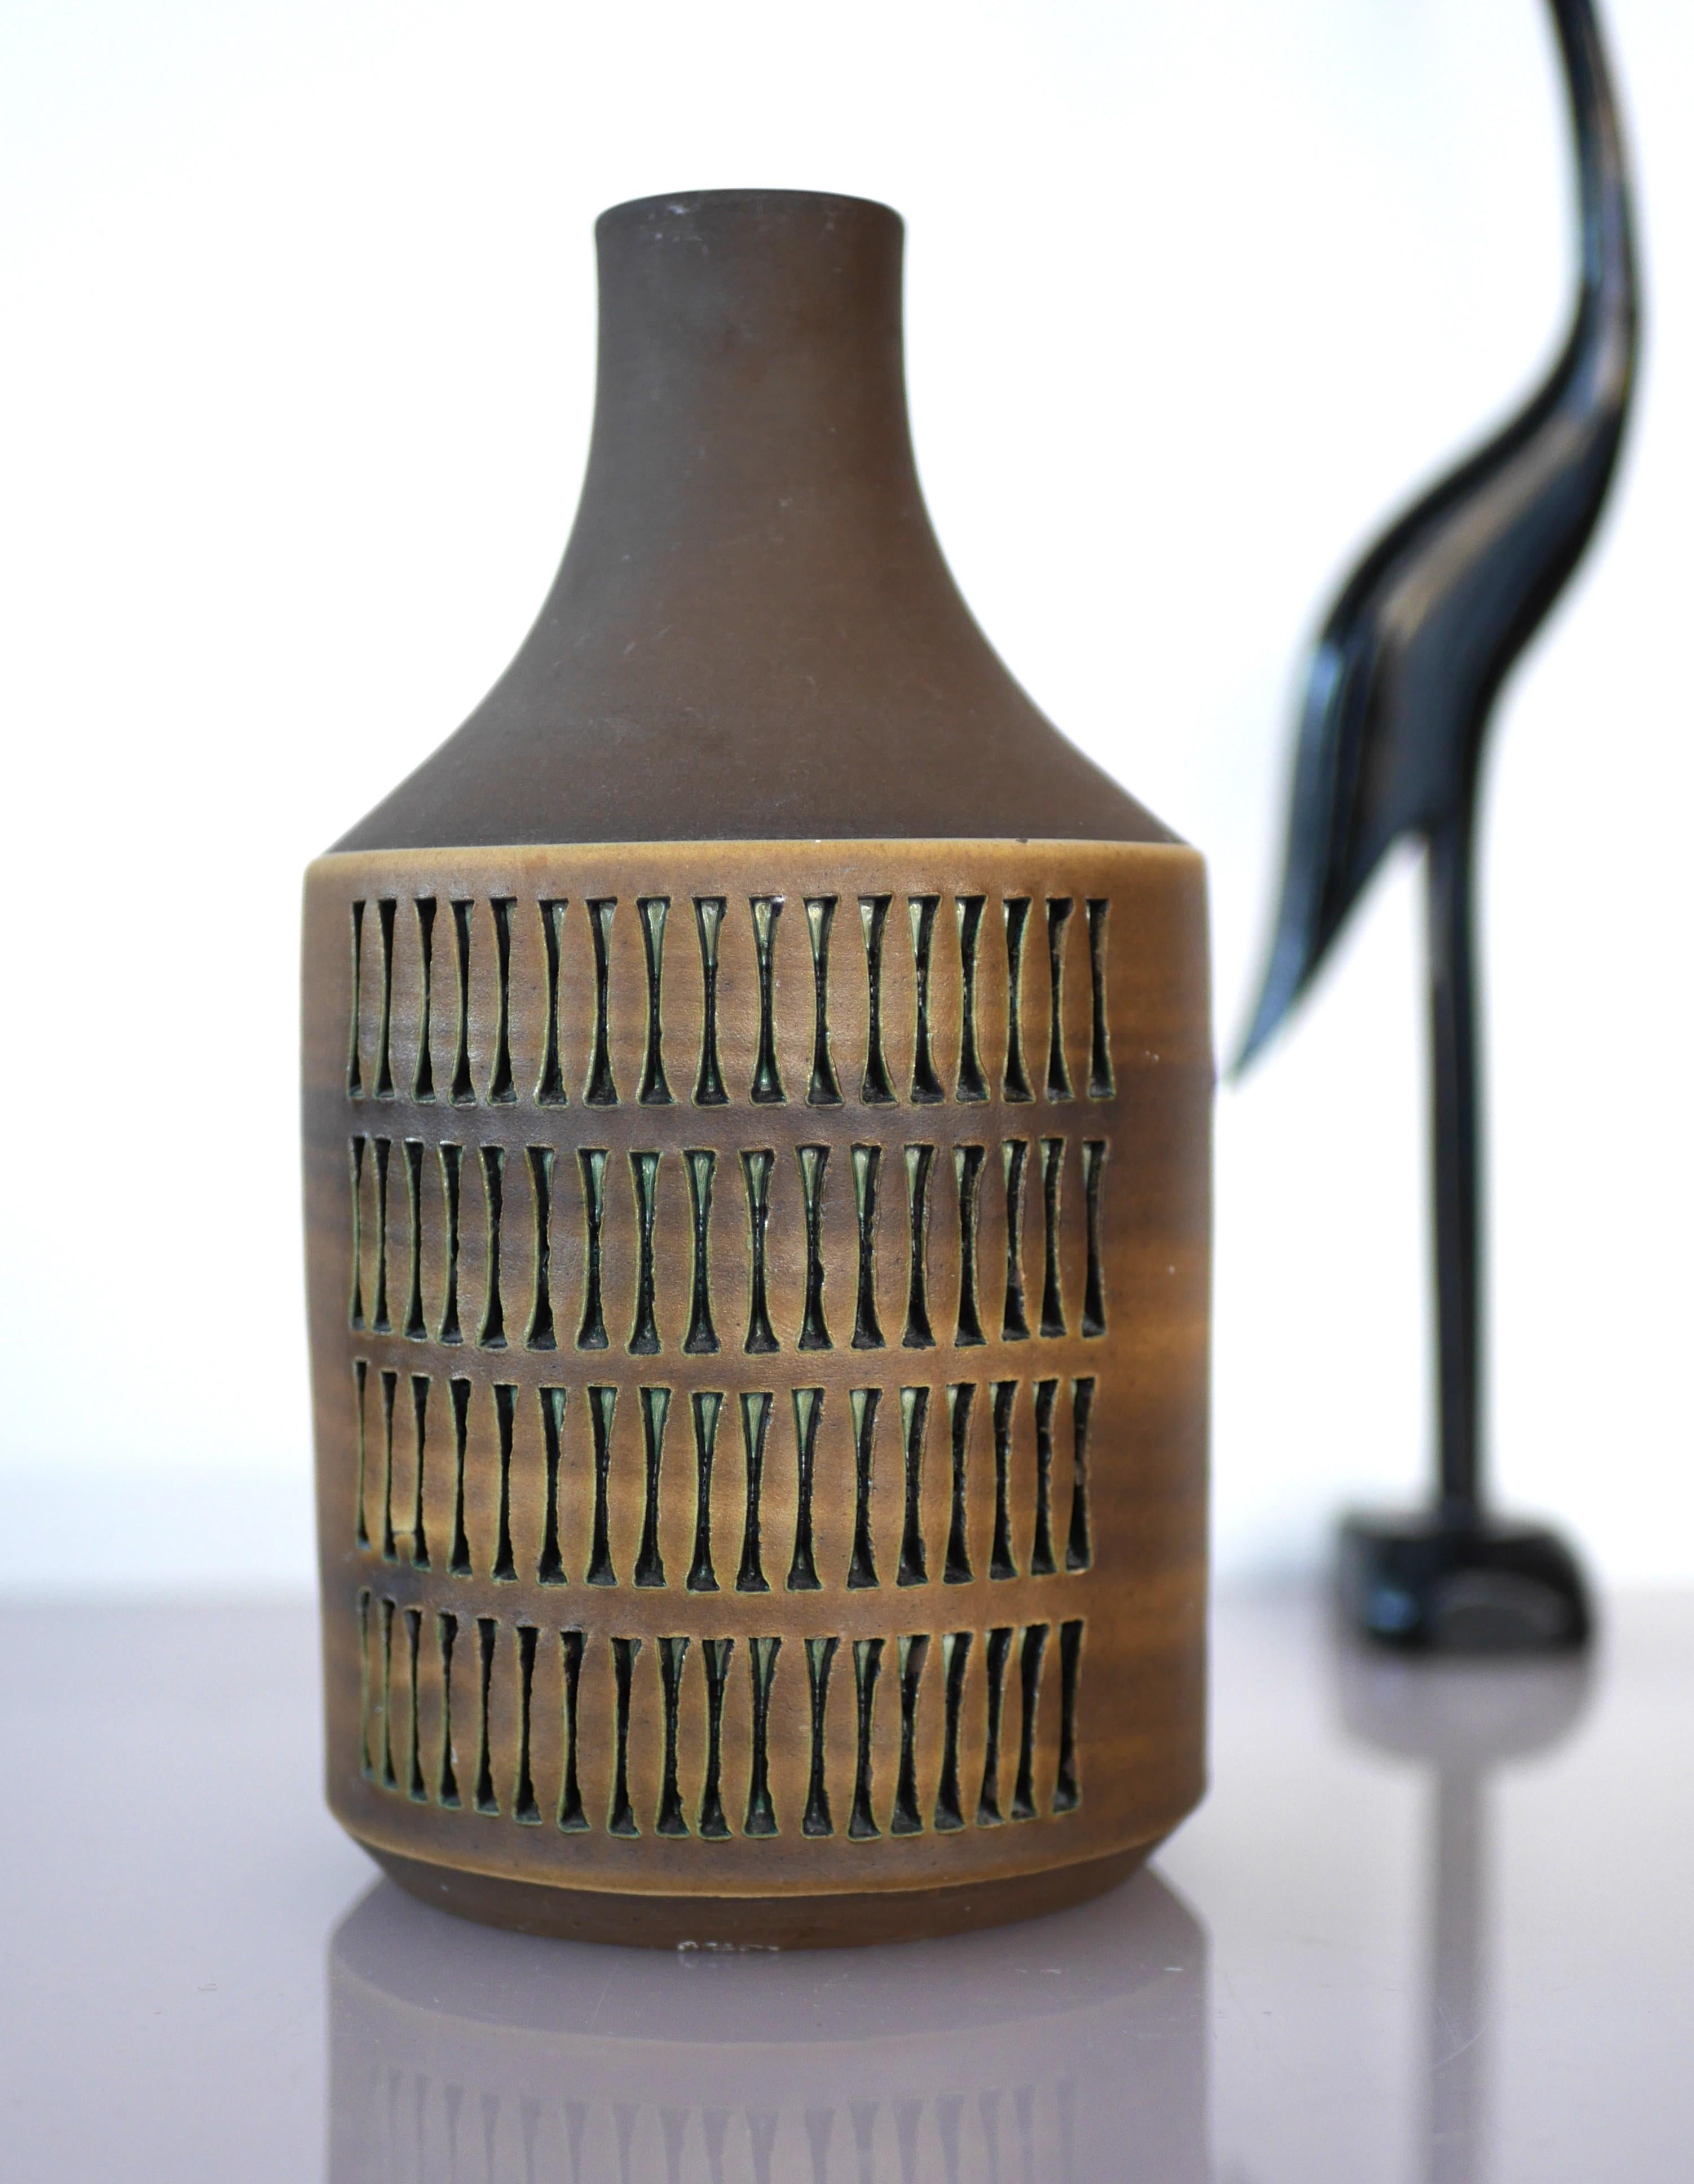 Vase from Alingsås, Sweden by Tomas Anagrius 2